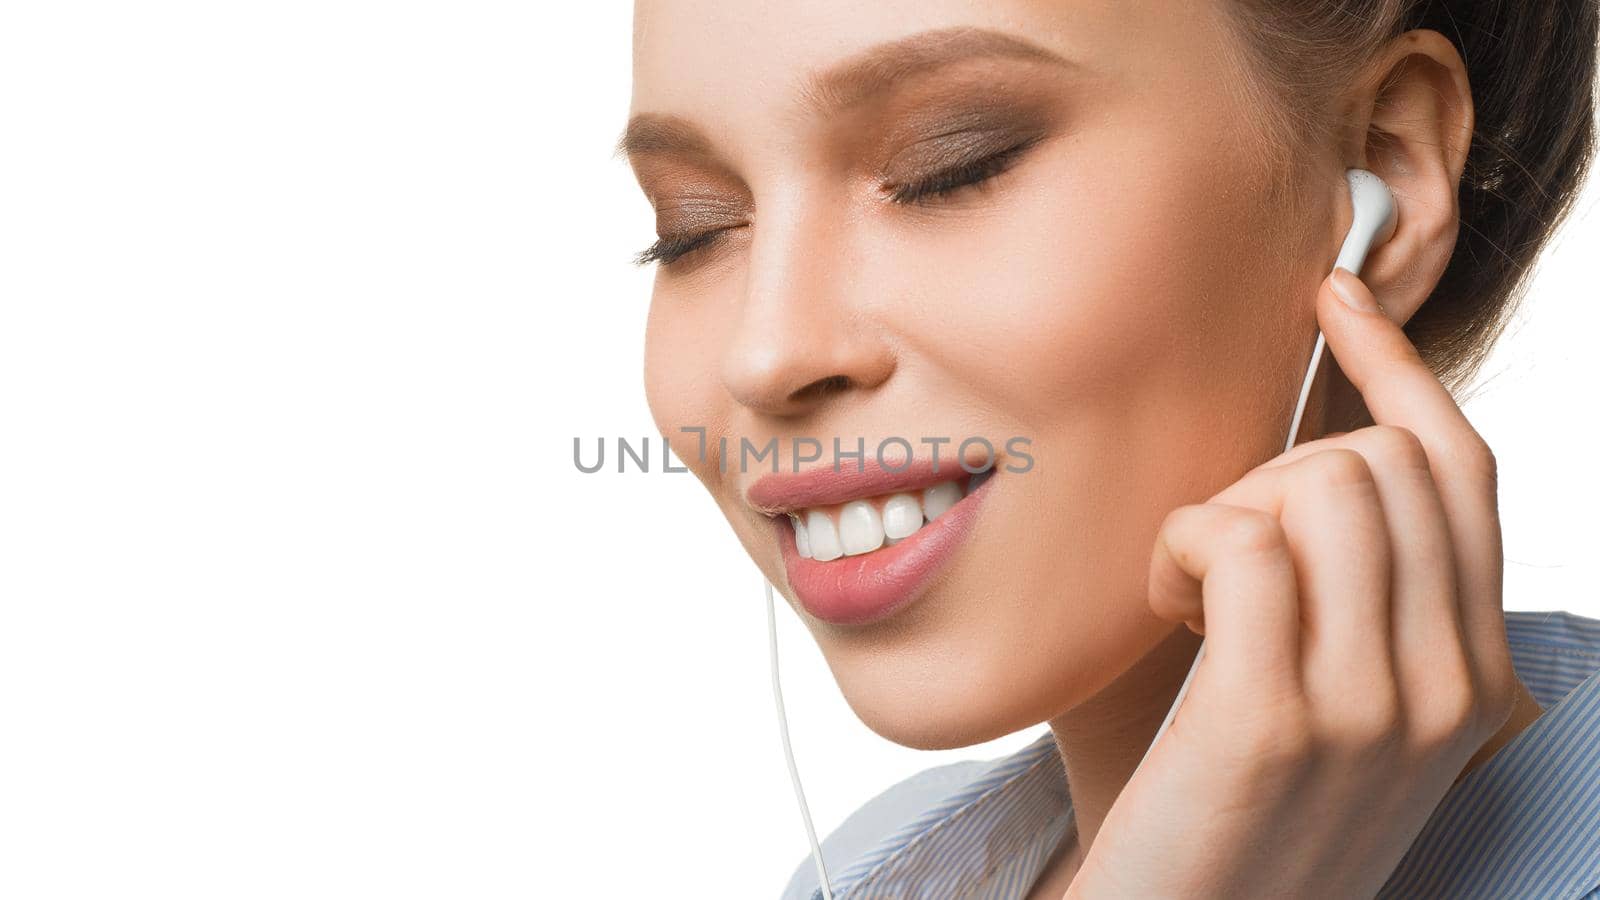 Close up portrait of a smiley young woman listening to the music via earphones.